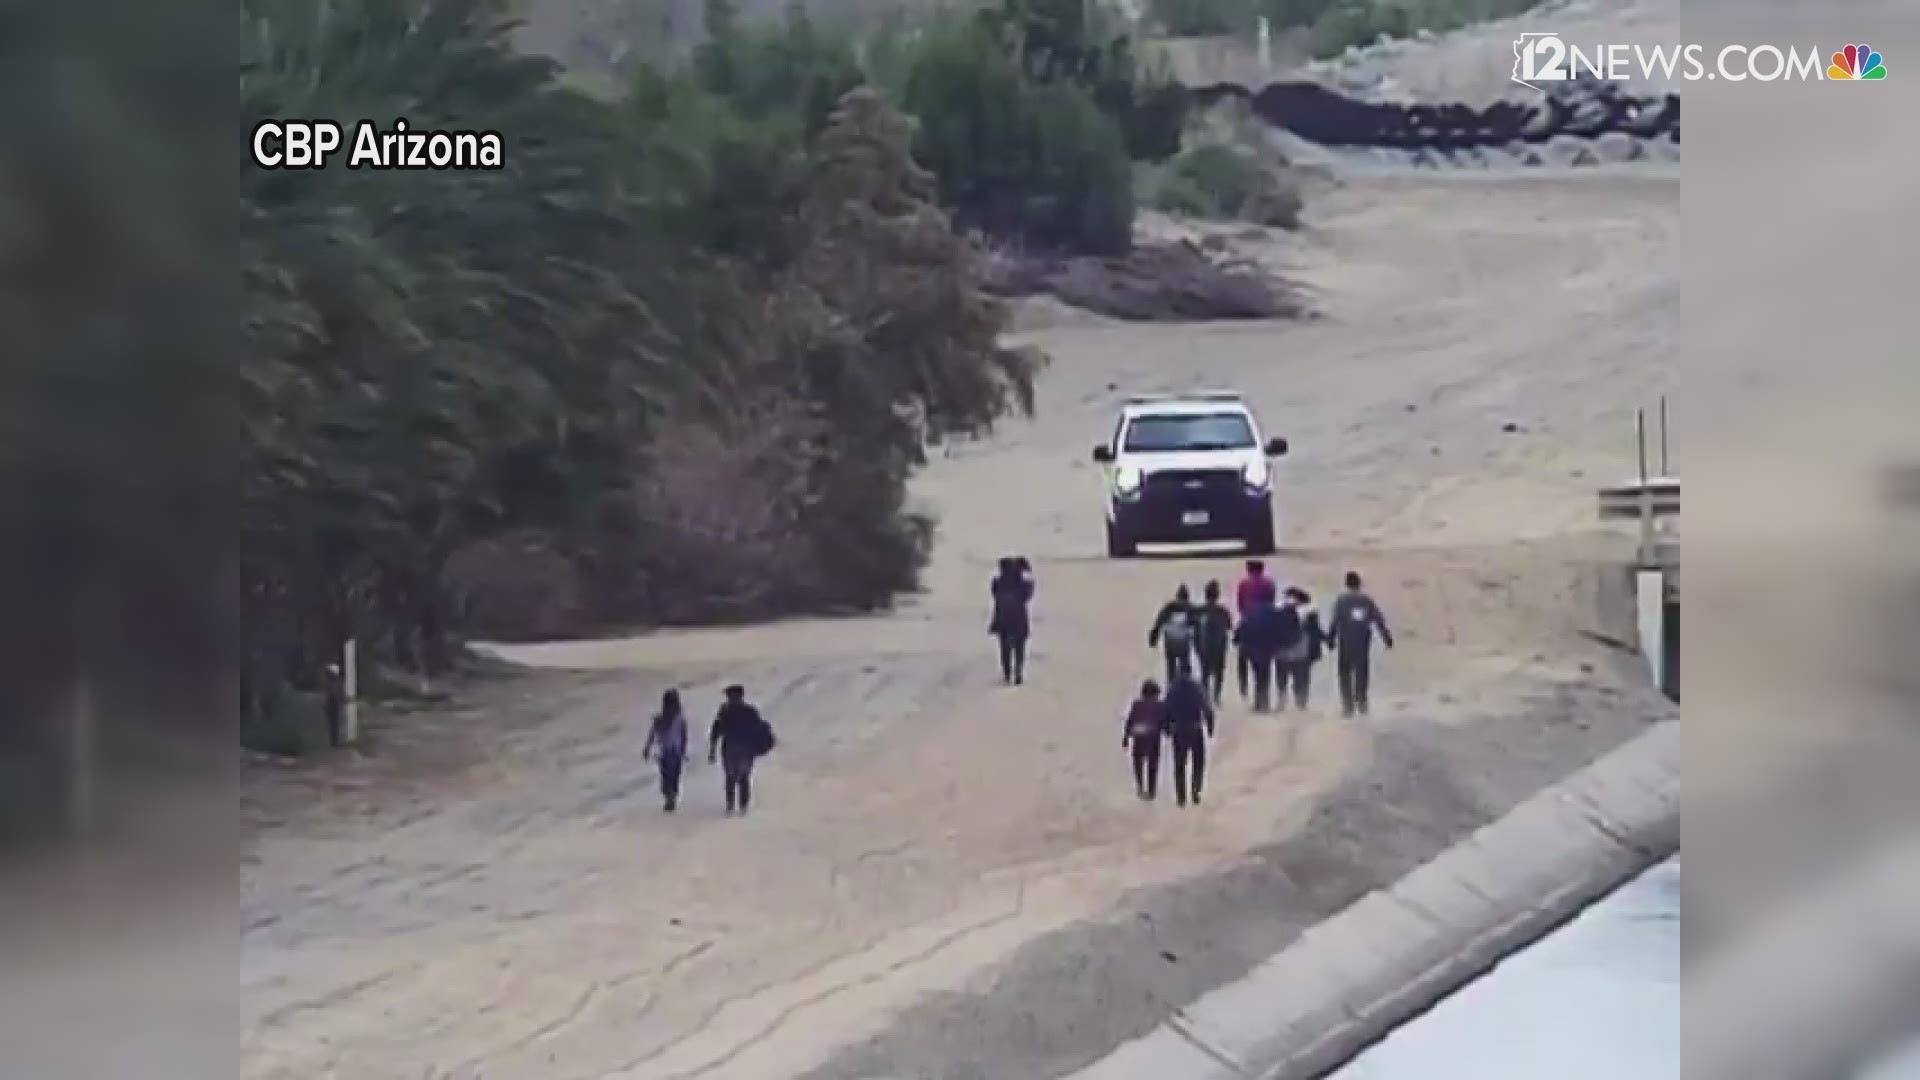 The Yuma sector of Customs and Border Protection apprehended 300 migrants at the border on Monday. Those that were apprehended were part of family groups and juveniles from Central America. They surrendered to agents.